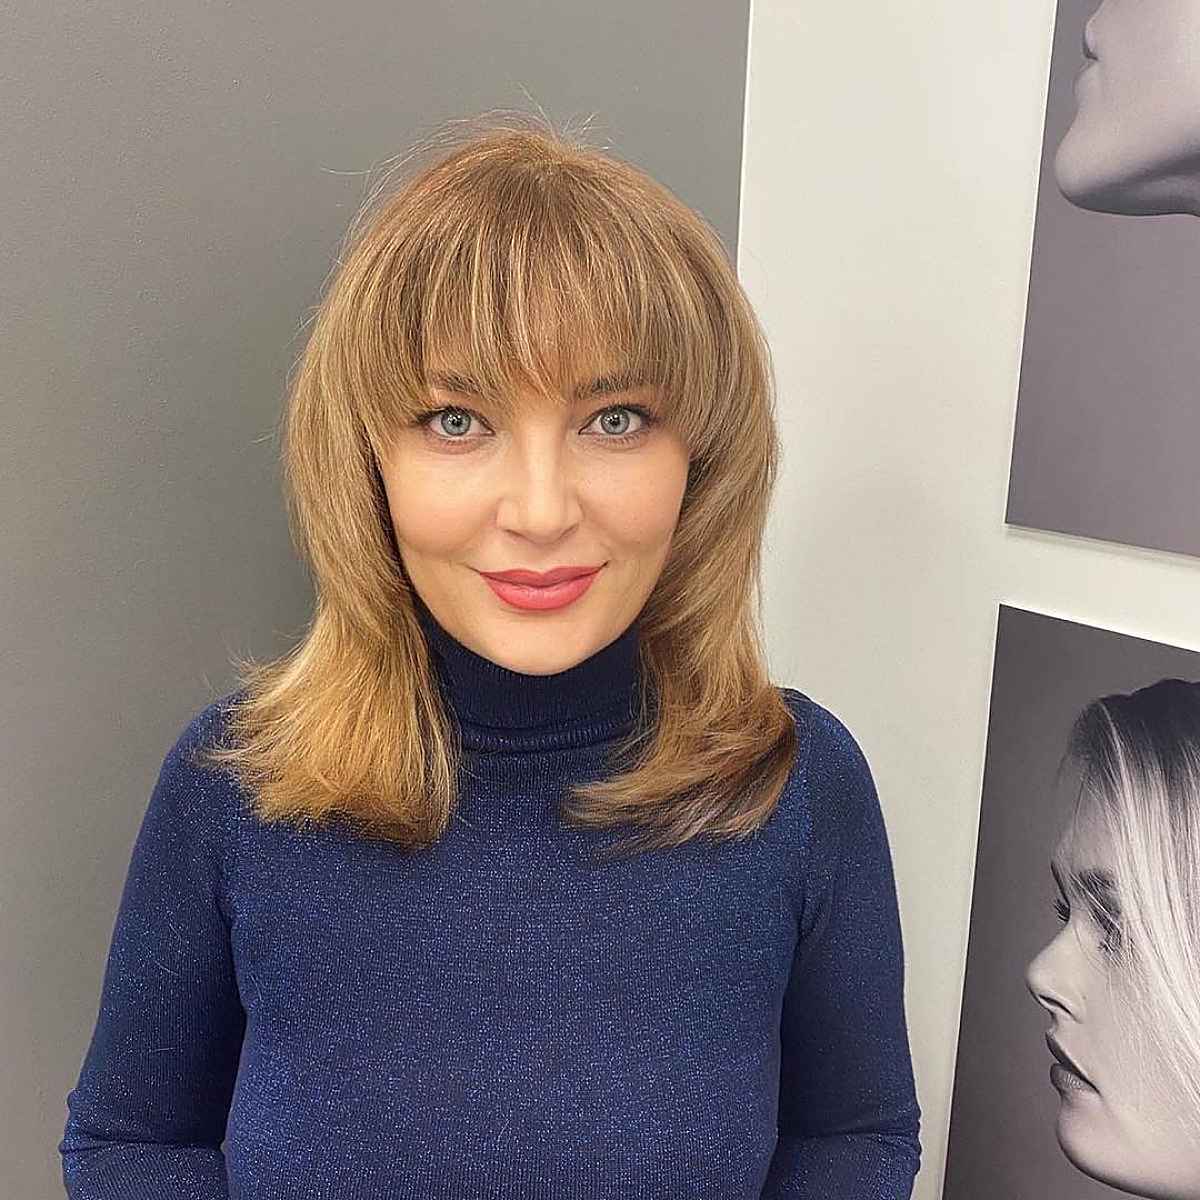 15 Best Ways to Rock a Low-Maintenance Shaggy Haircut with Bangs